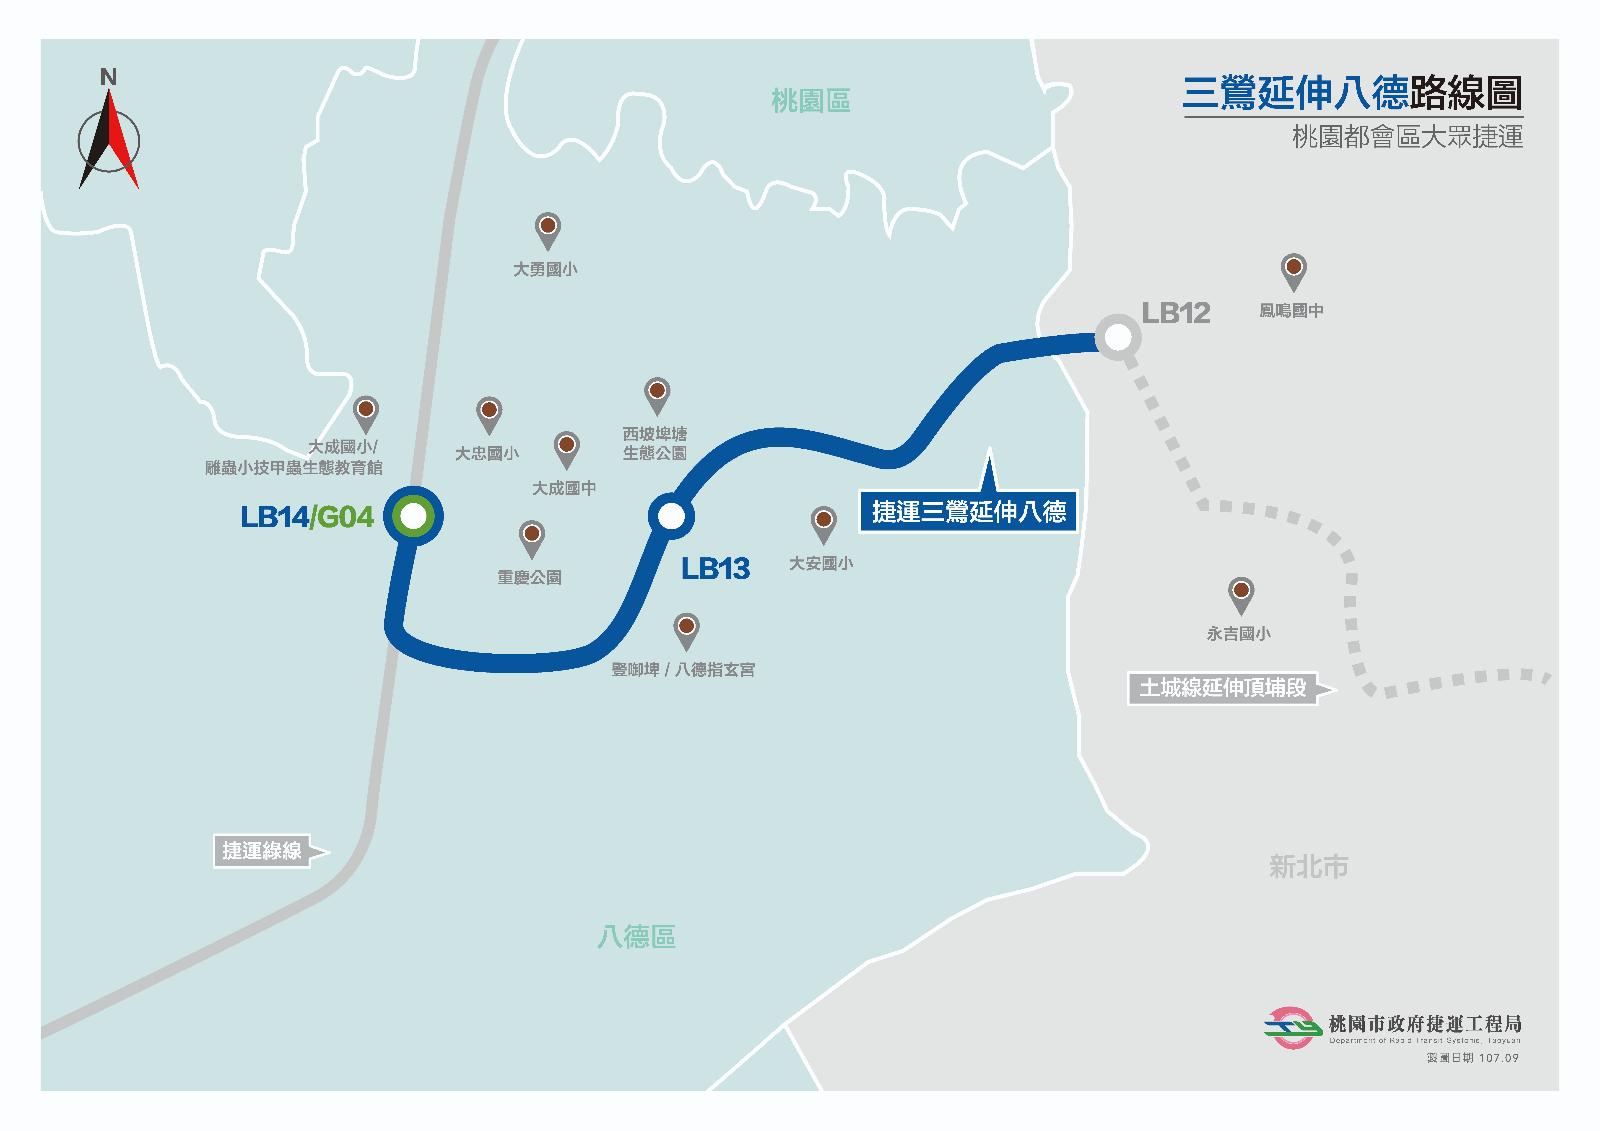 Sanying Line Extension Section Route Map